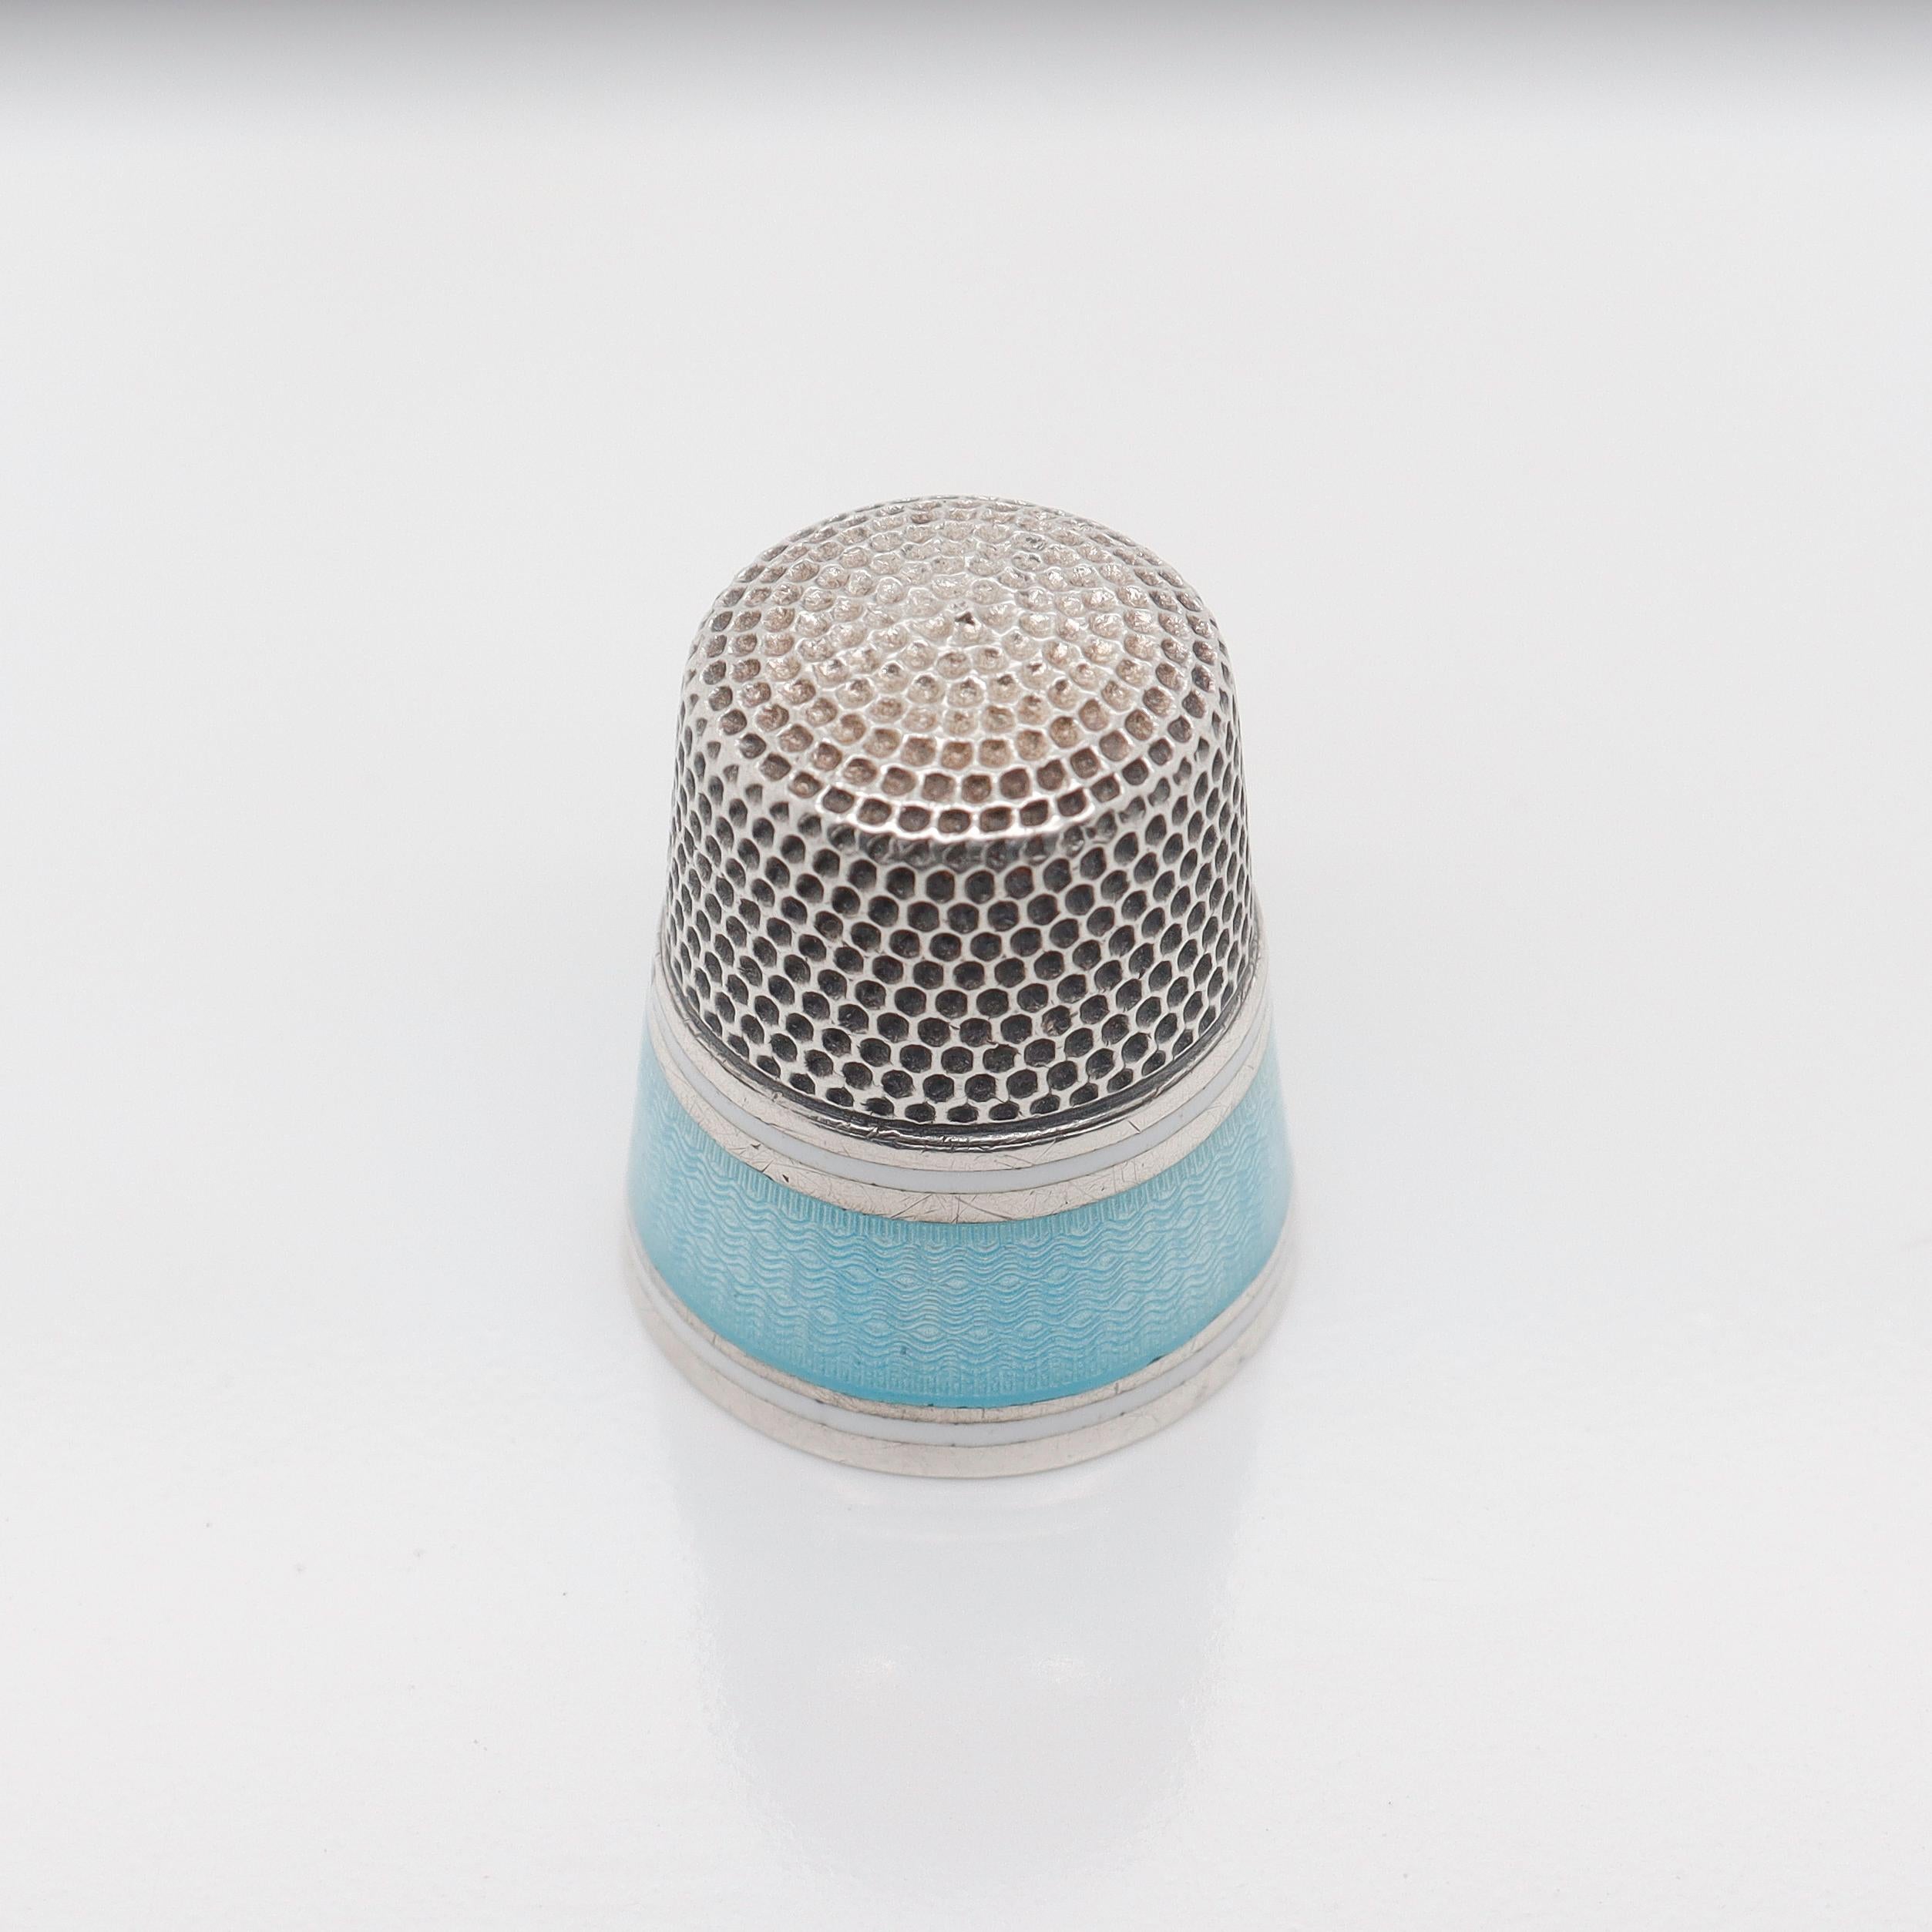 A fine antique American thimble.

By Simmons Brothers.

In sterling silver with a band of guilloche enamel flanked by two thin bands of white enamel around the circumference.

Marked to the interior with the number 11 (likely a size) as well as with